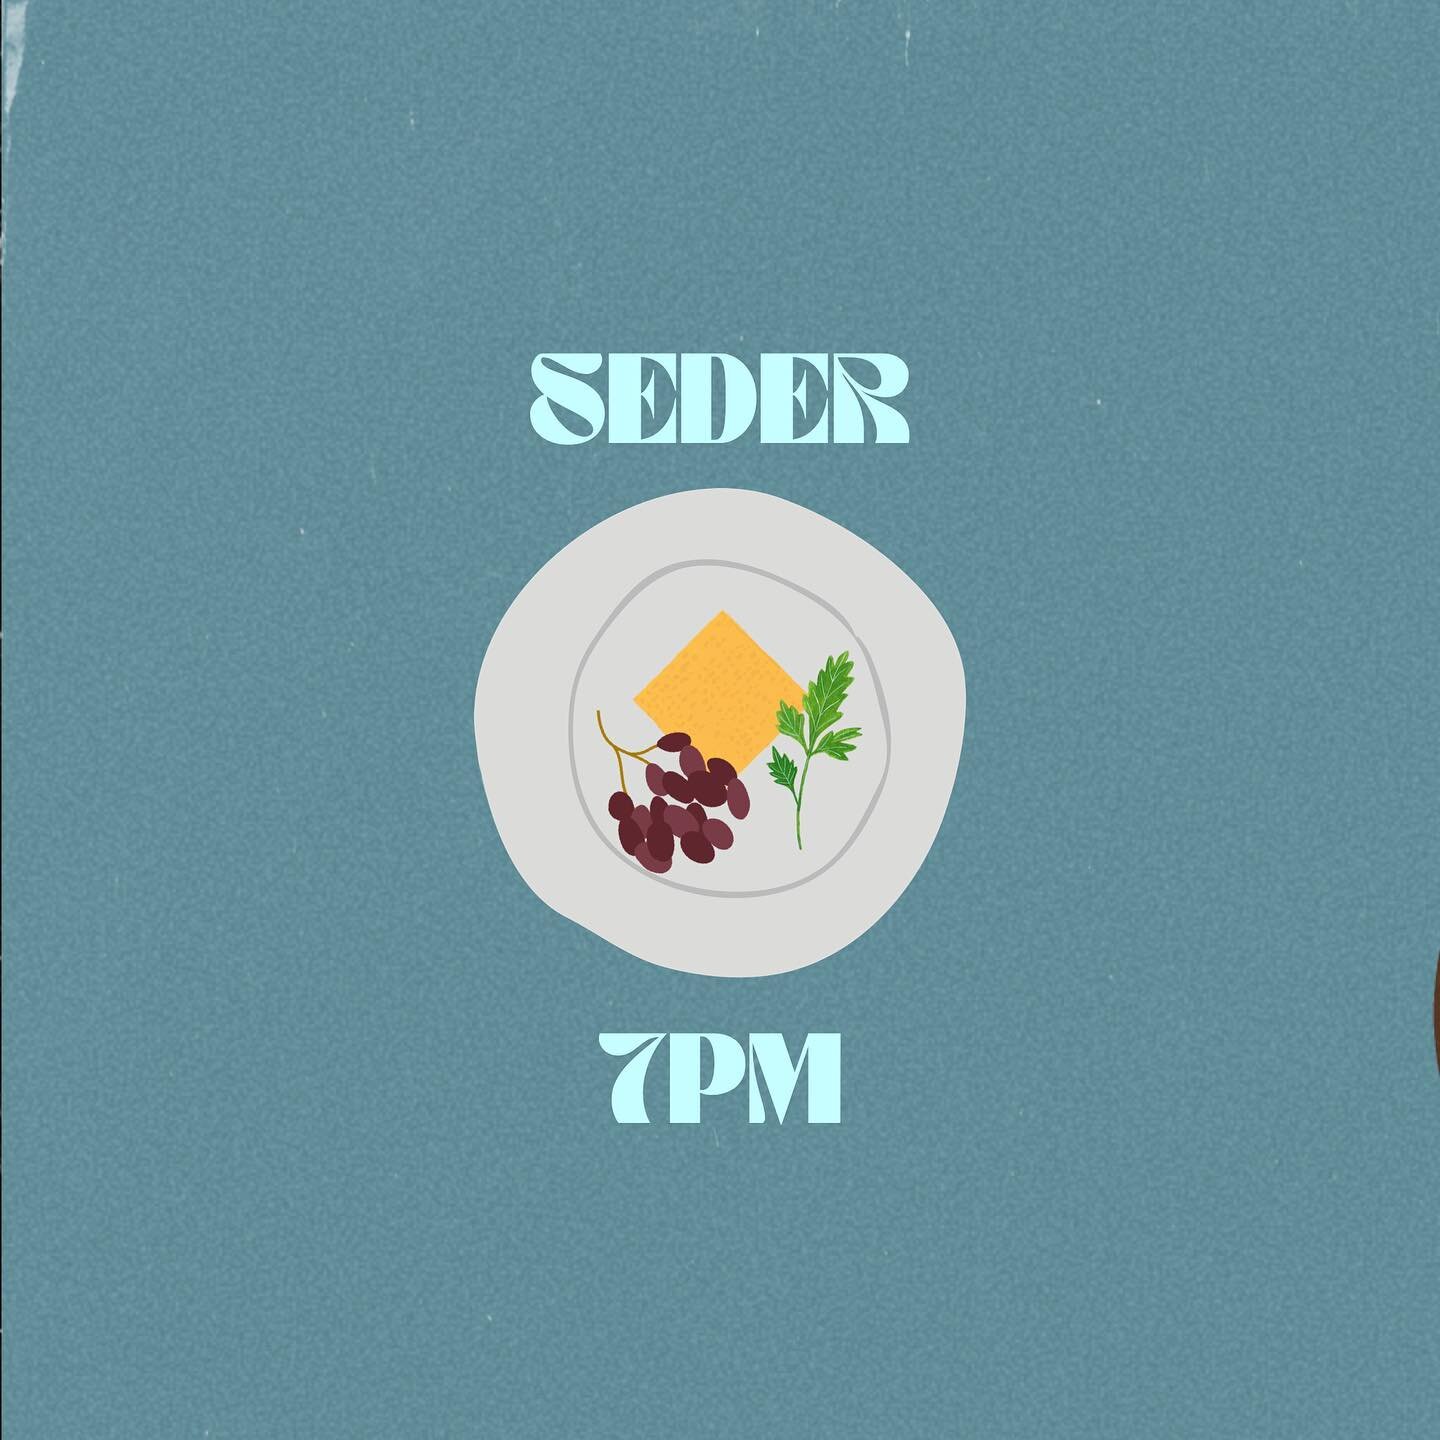 Come out for the Seder tonight at 7pm! Seats are limited and go quick. We recommend you get here early for a spot. See you soon!